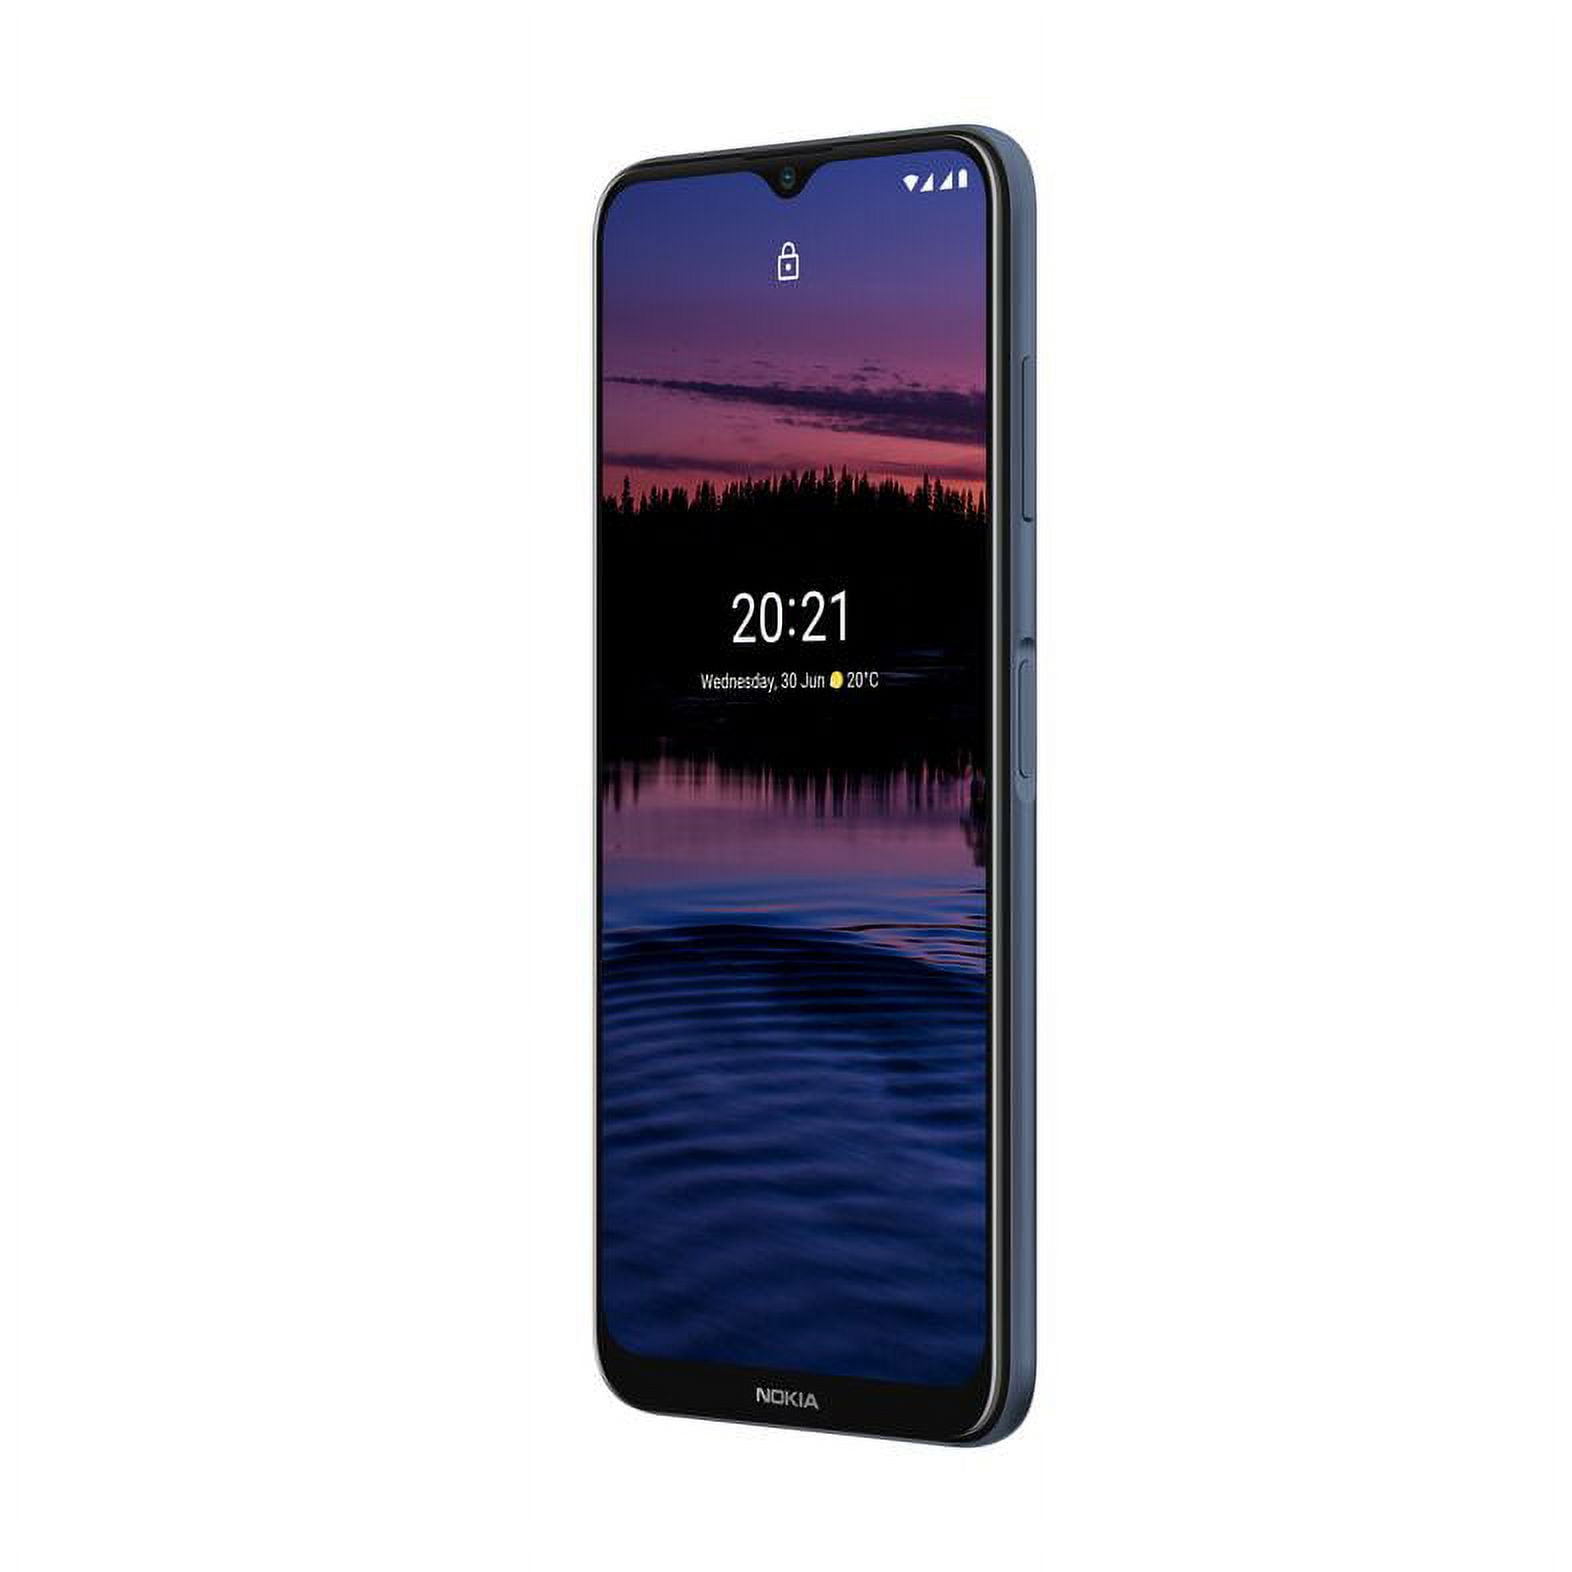  Nokia 6.2 - Android 9.0 Pie - 64 GB - Triple Camera - Unlocked  Smartphone (AT&T/T-Mobile/MetroPCS/Cricket/Mint) - 6.3 FHD+ HDR Screen -  Black - U.S. Warranty : Everything Else